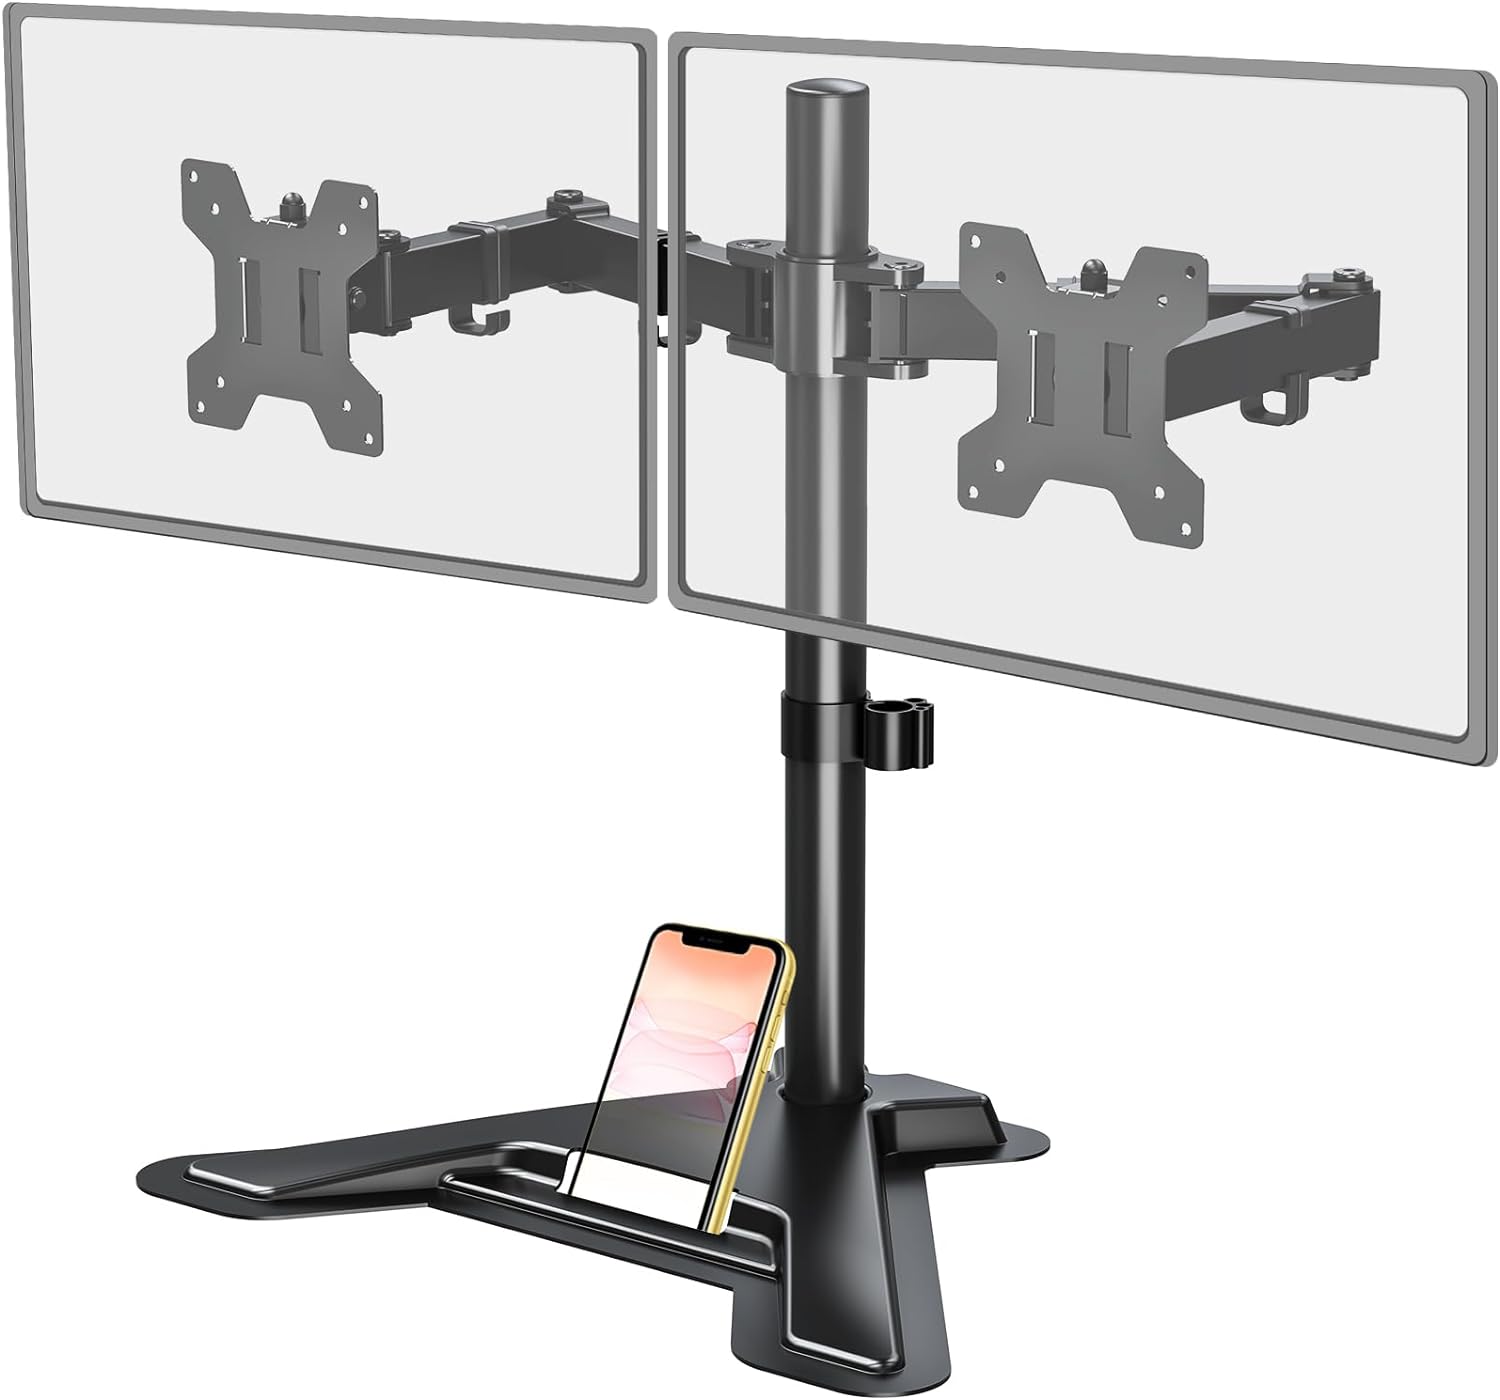 GREAT MOUNT FOR THE PRICE. PRETTY FIRM AND STABLE. THE ONLY ISSUE I RAN INTO WAS THE HARDWARE DIDNT WORK ON MY MONITORS SO I ORDERED ANOTHER KIT. BUT NOT A BIG DEAL.